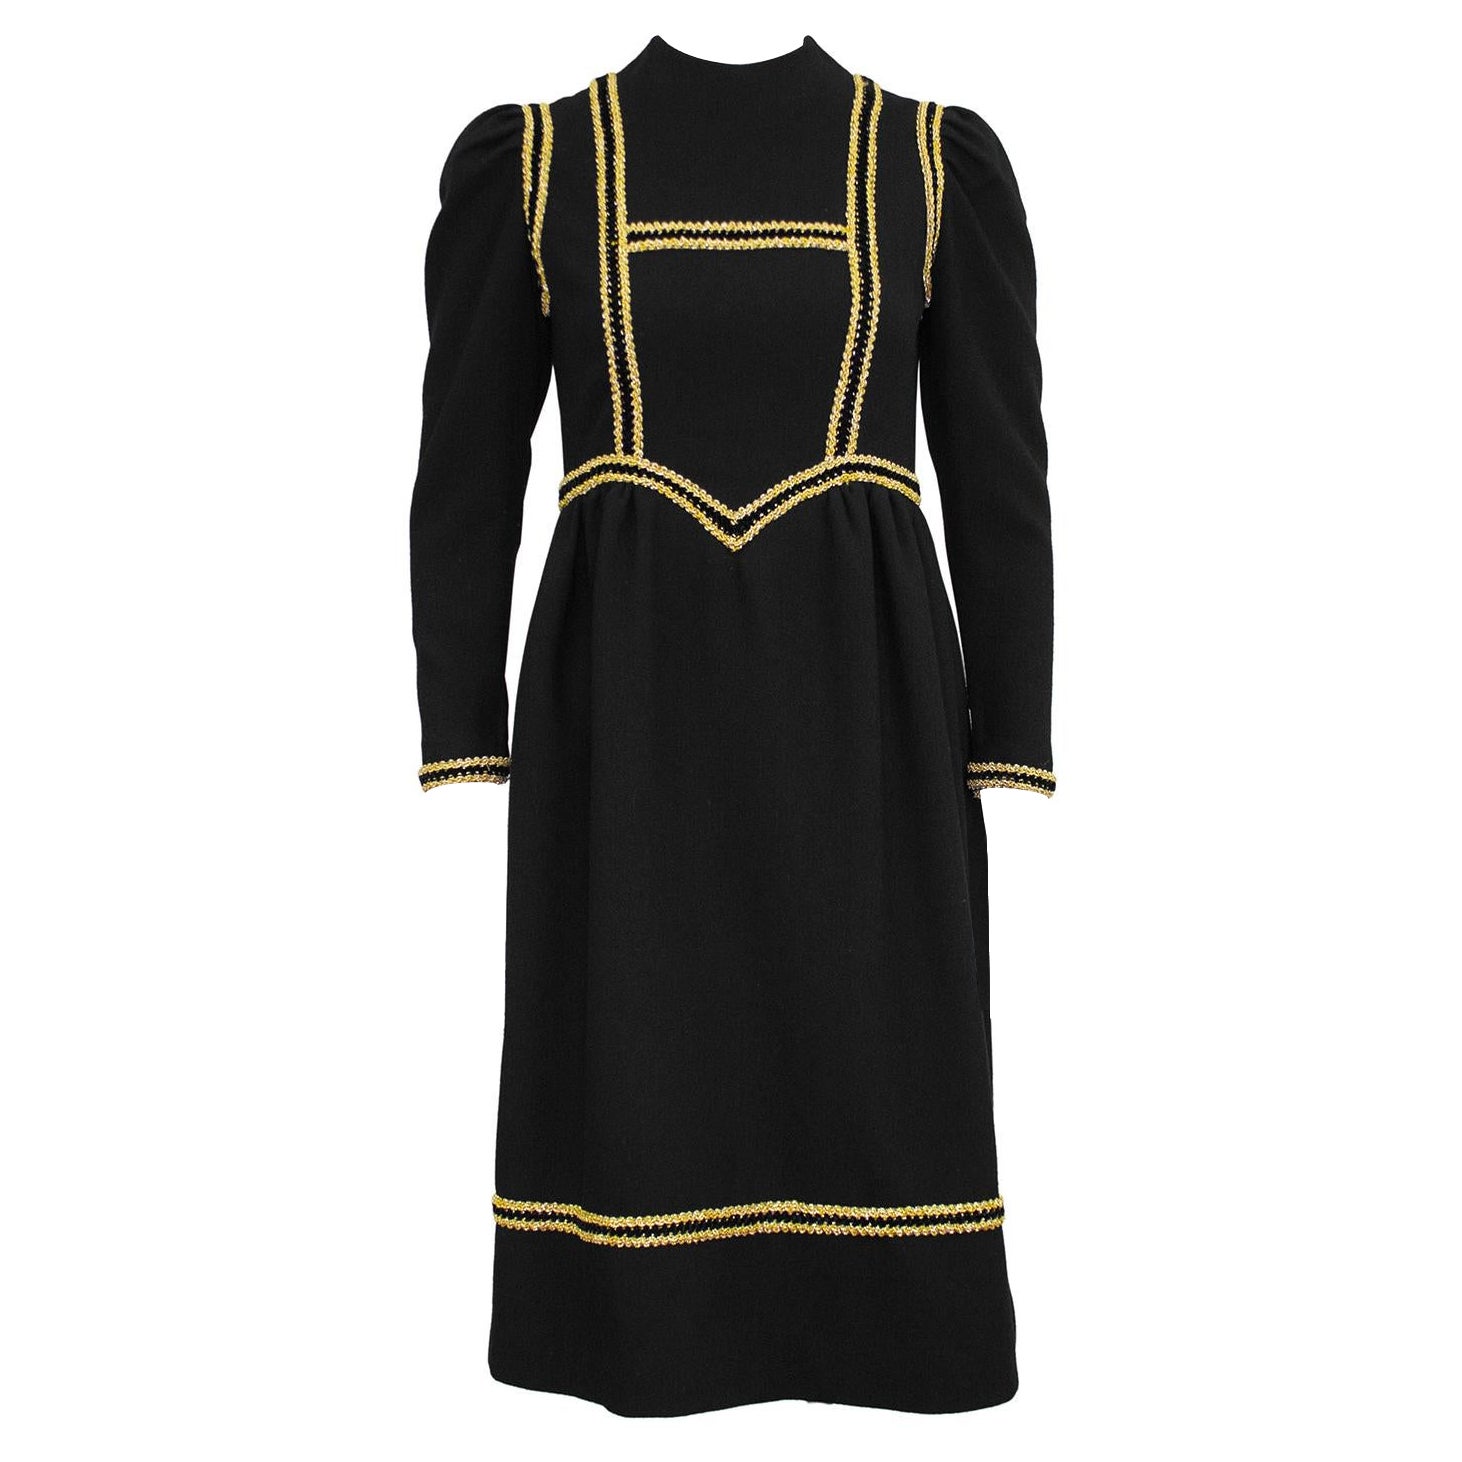 1960s Geoffrey Beene Black and Gold Dress